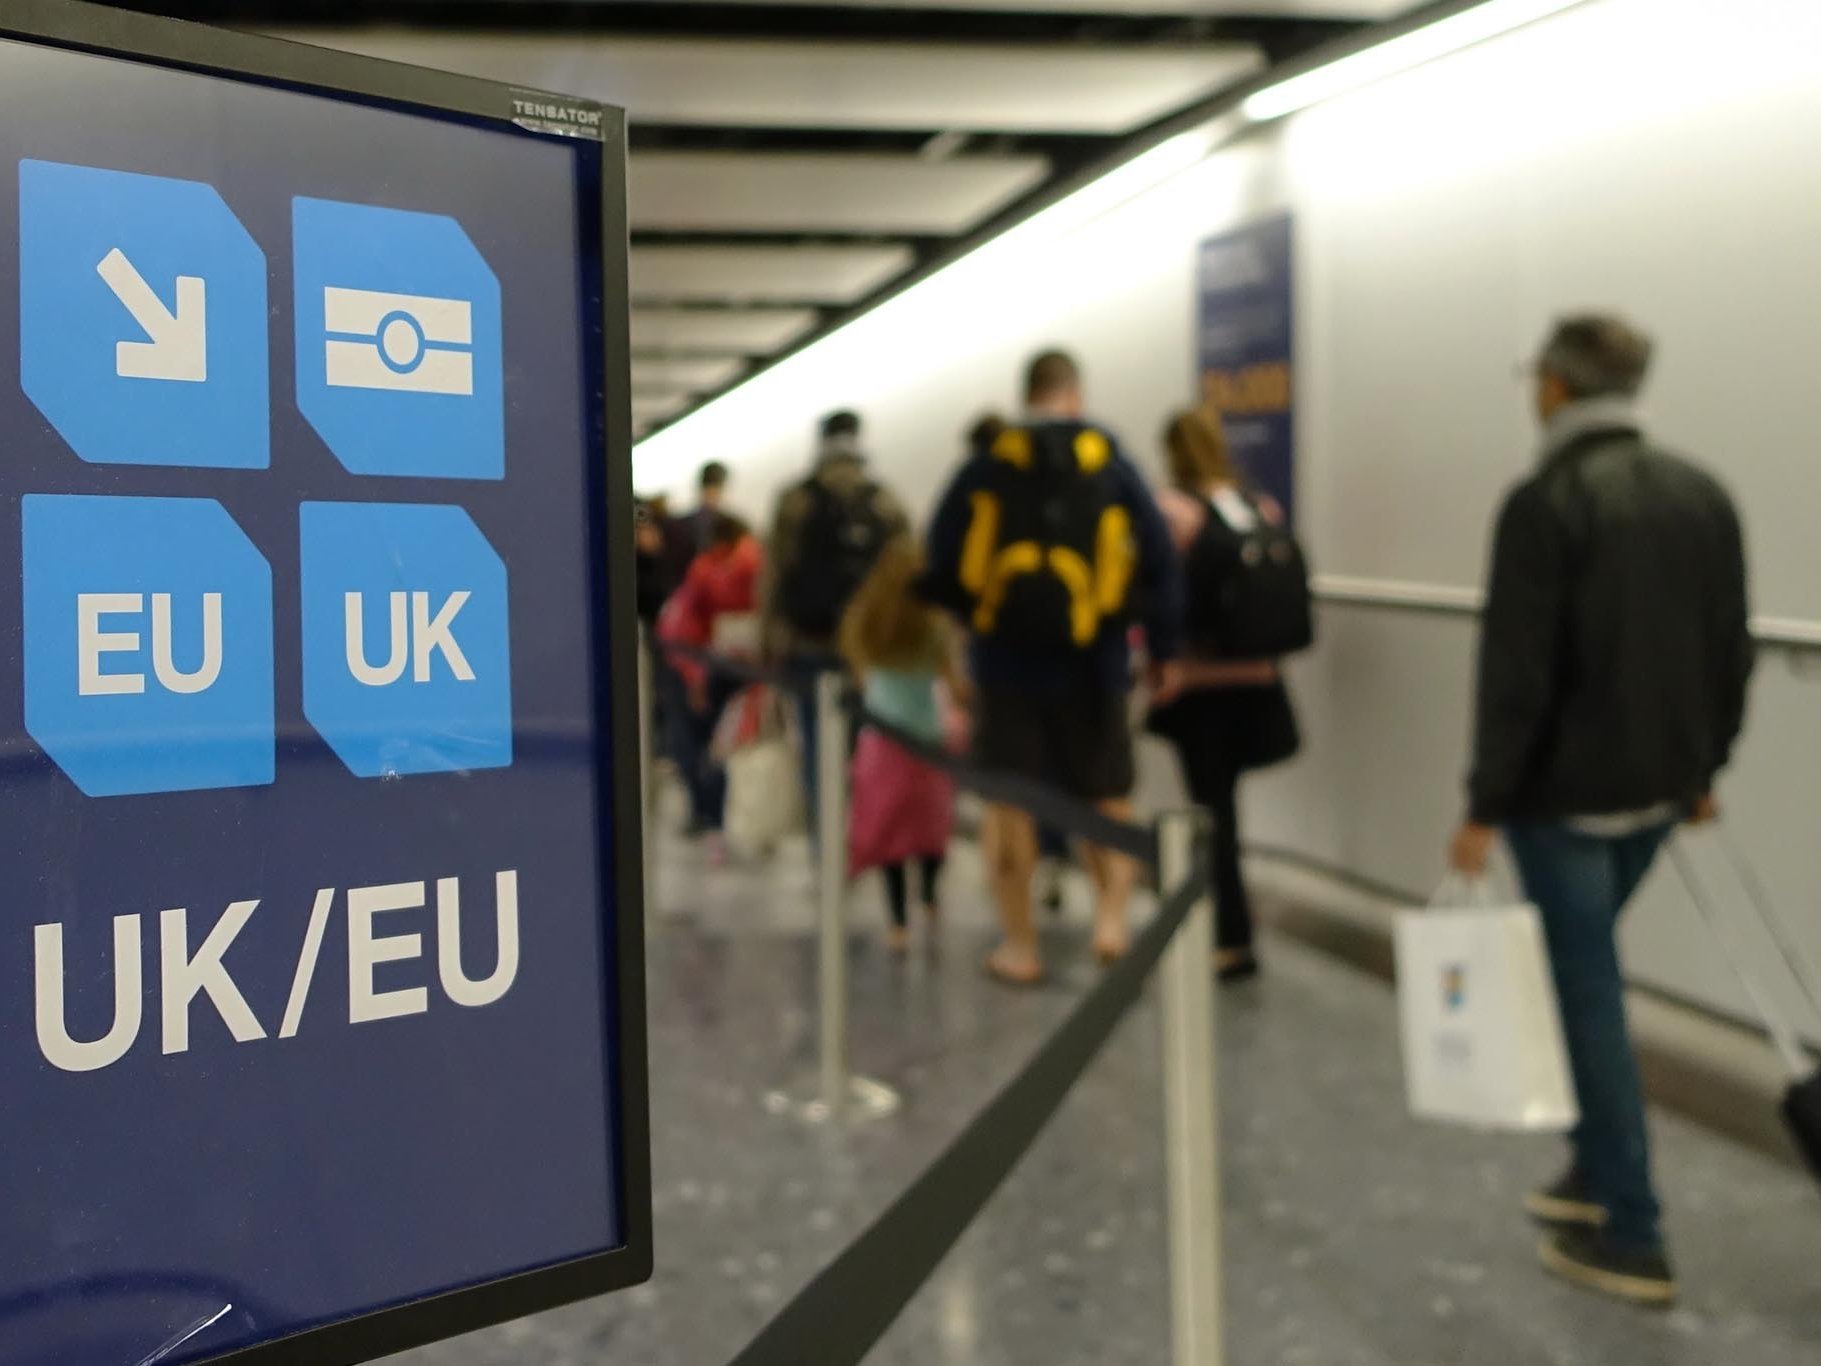 UK travellers heading to the EU will have to apply online for a VISA exemption.